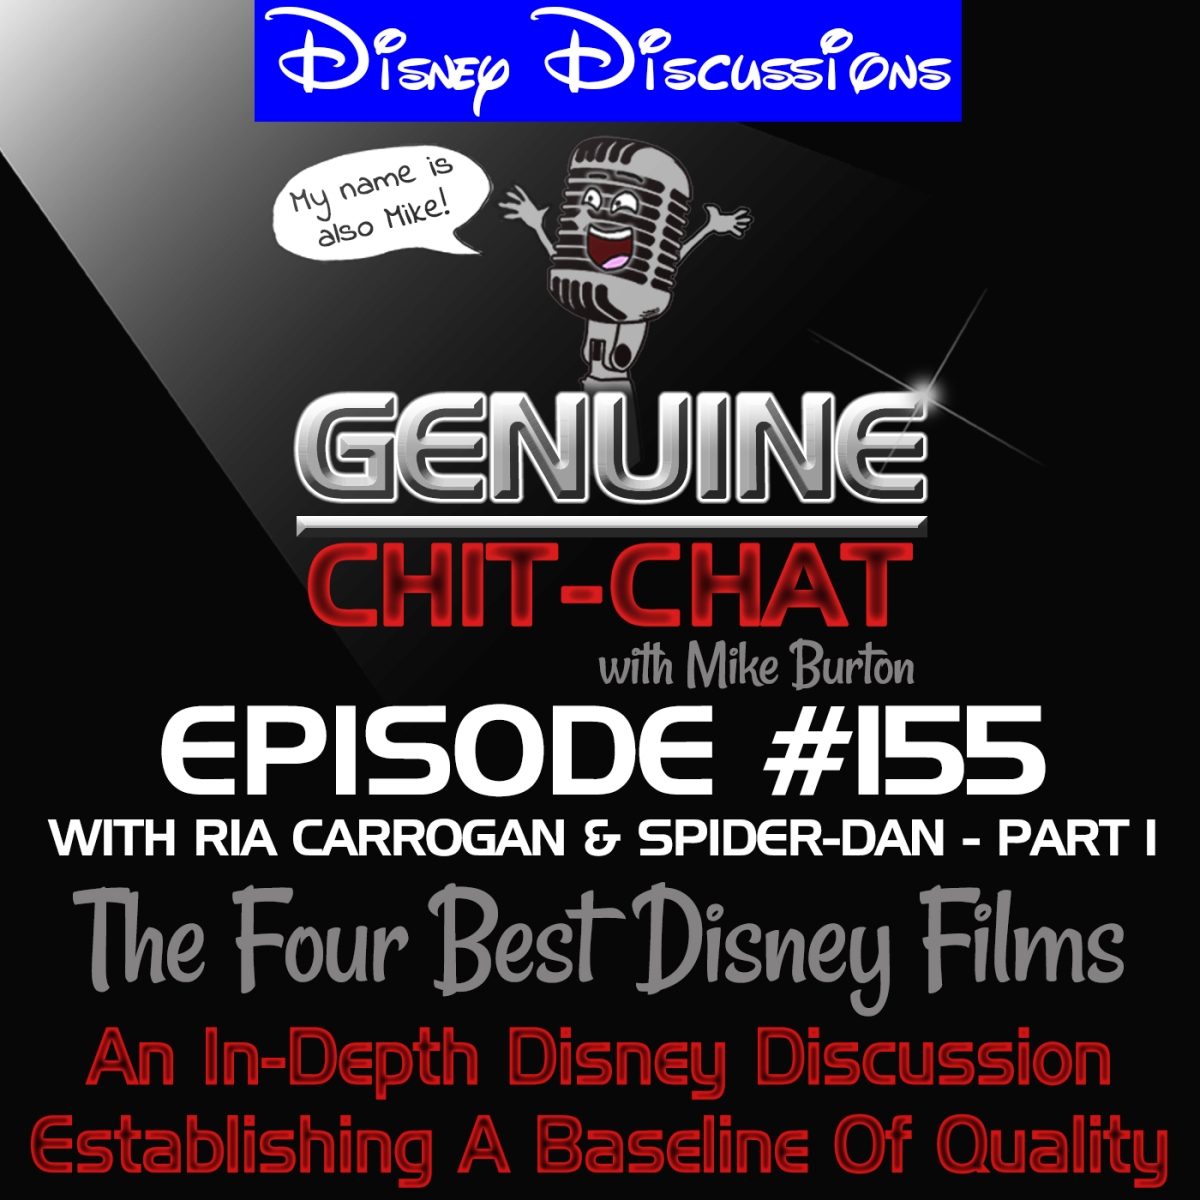 #155 Pt 1 – The Four Best Disney Films: An In-Depth Disney Discussion Establishing A Baseline Of Quality With Ria Carrogan & Spider-Dan